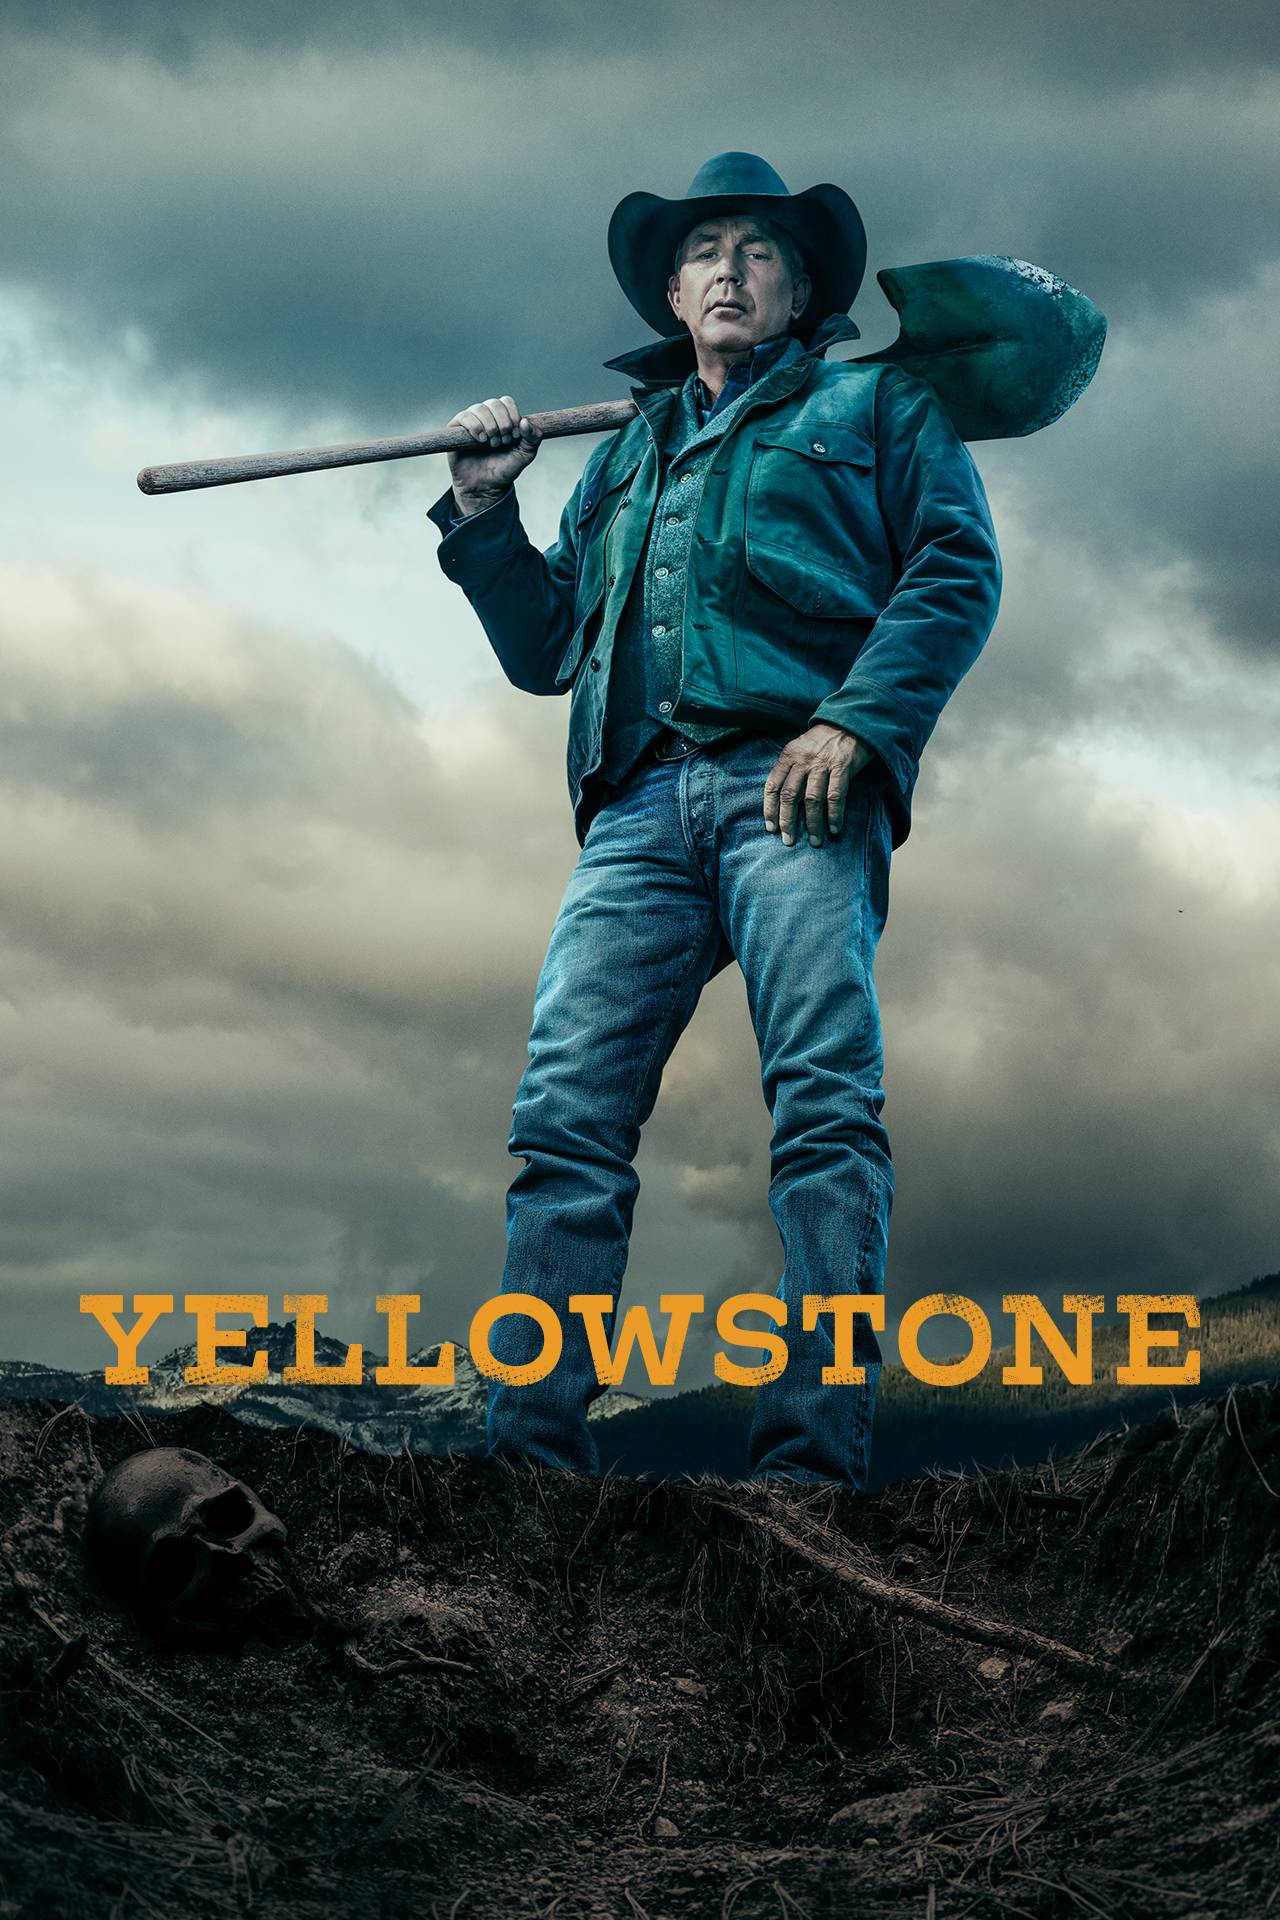 Yellowstone season 4: Updates and more details! - DroidJournal